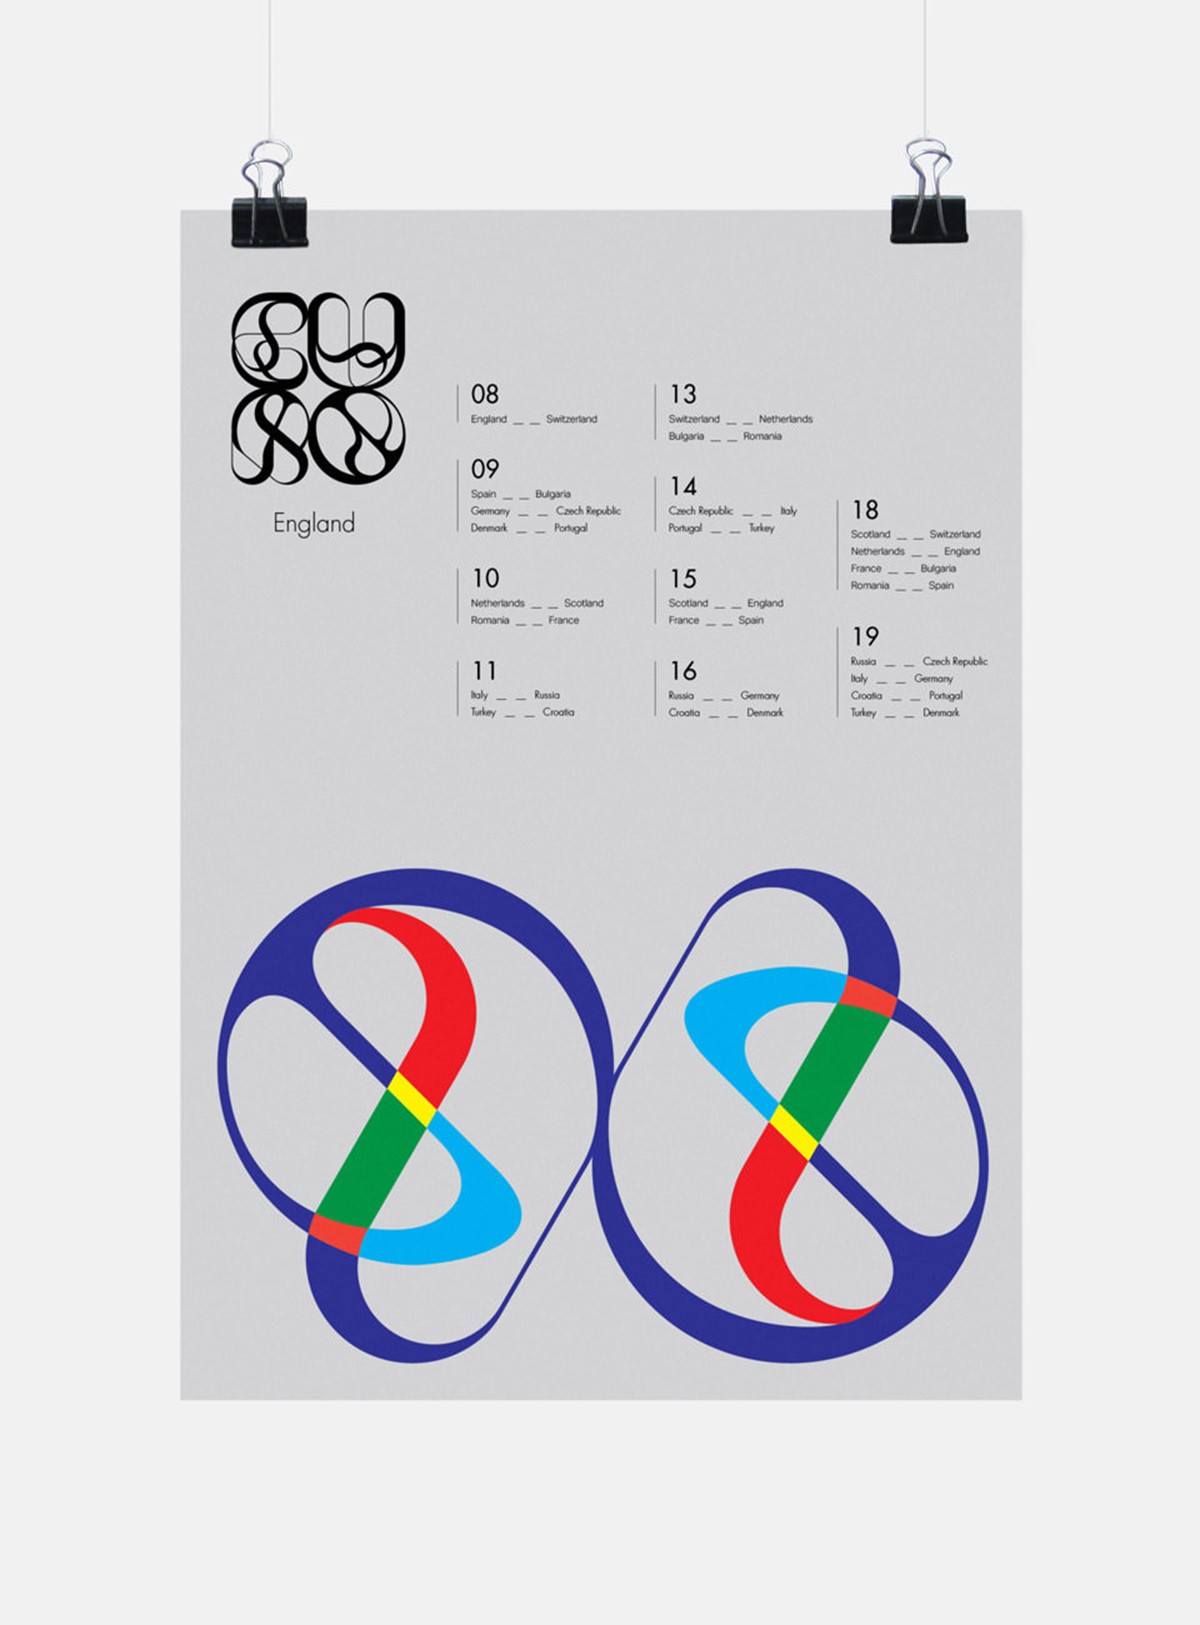 Marbles. Euro 96 poster mock-up. Typography design by Superfried.